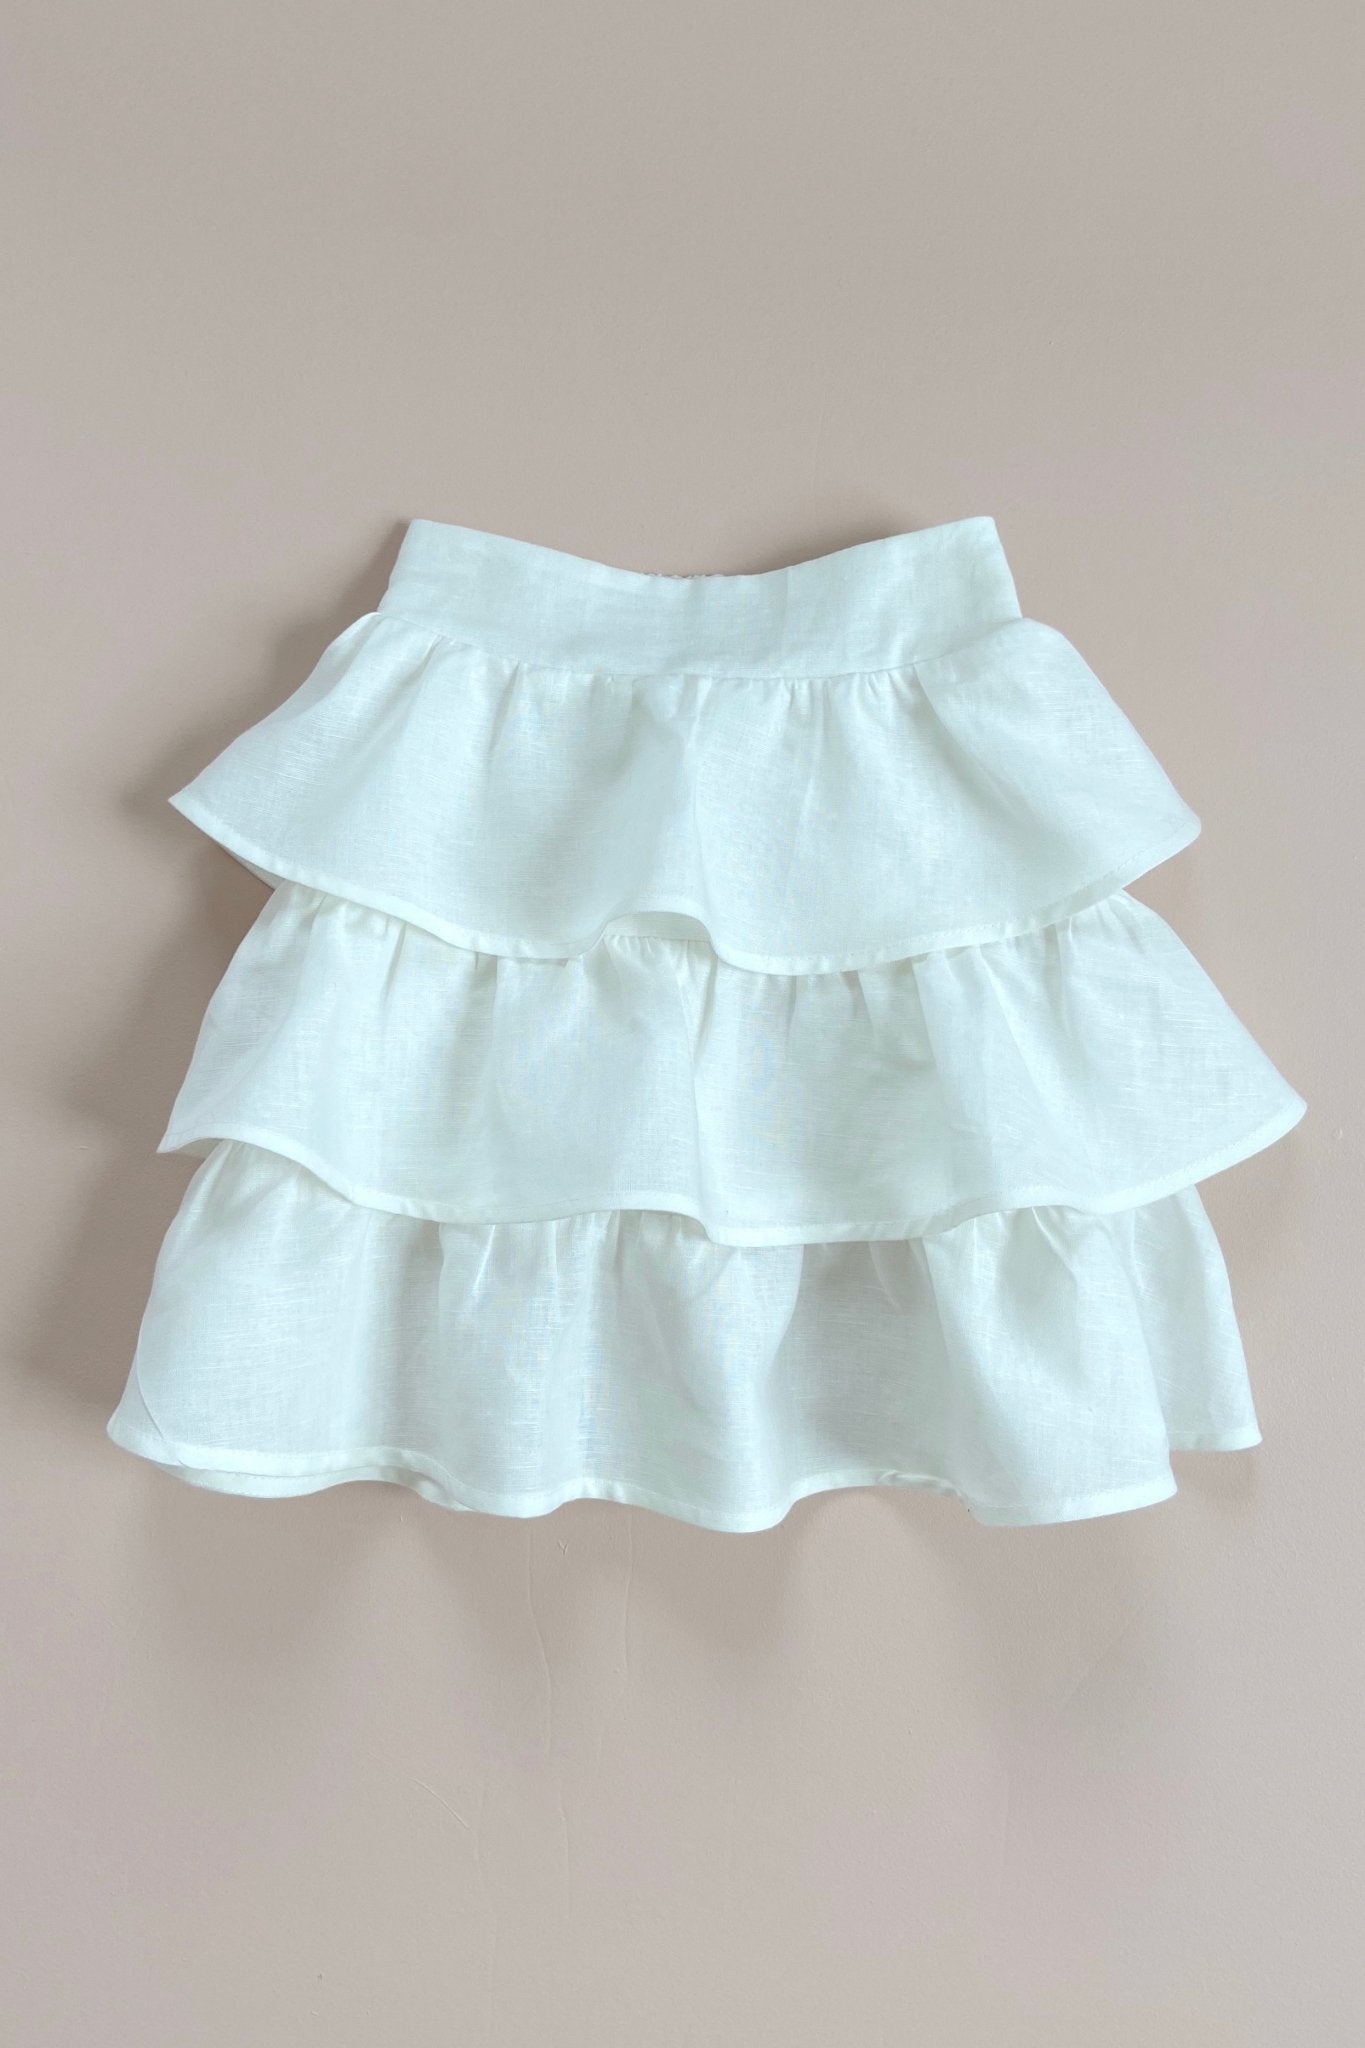 Sing a Song of Rainbows Skirt - Antique White - Chloé and Amélie